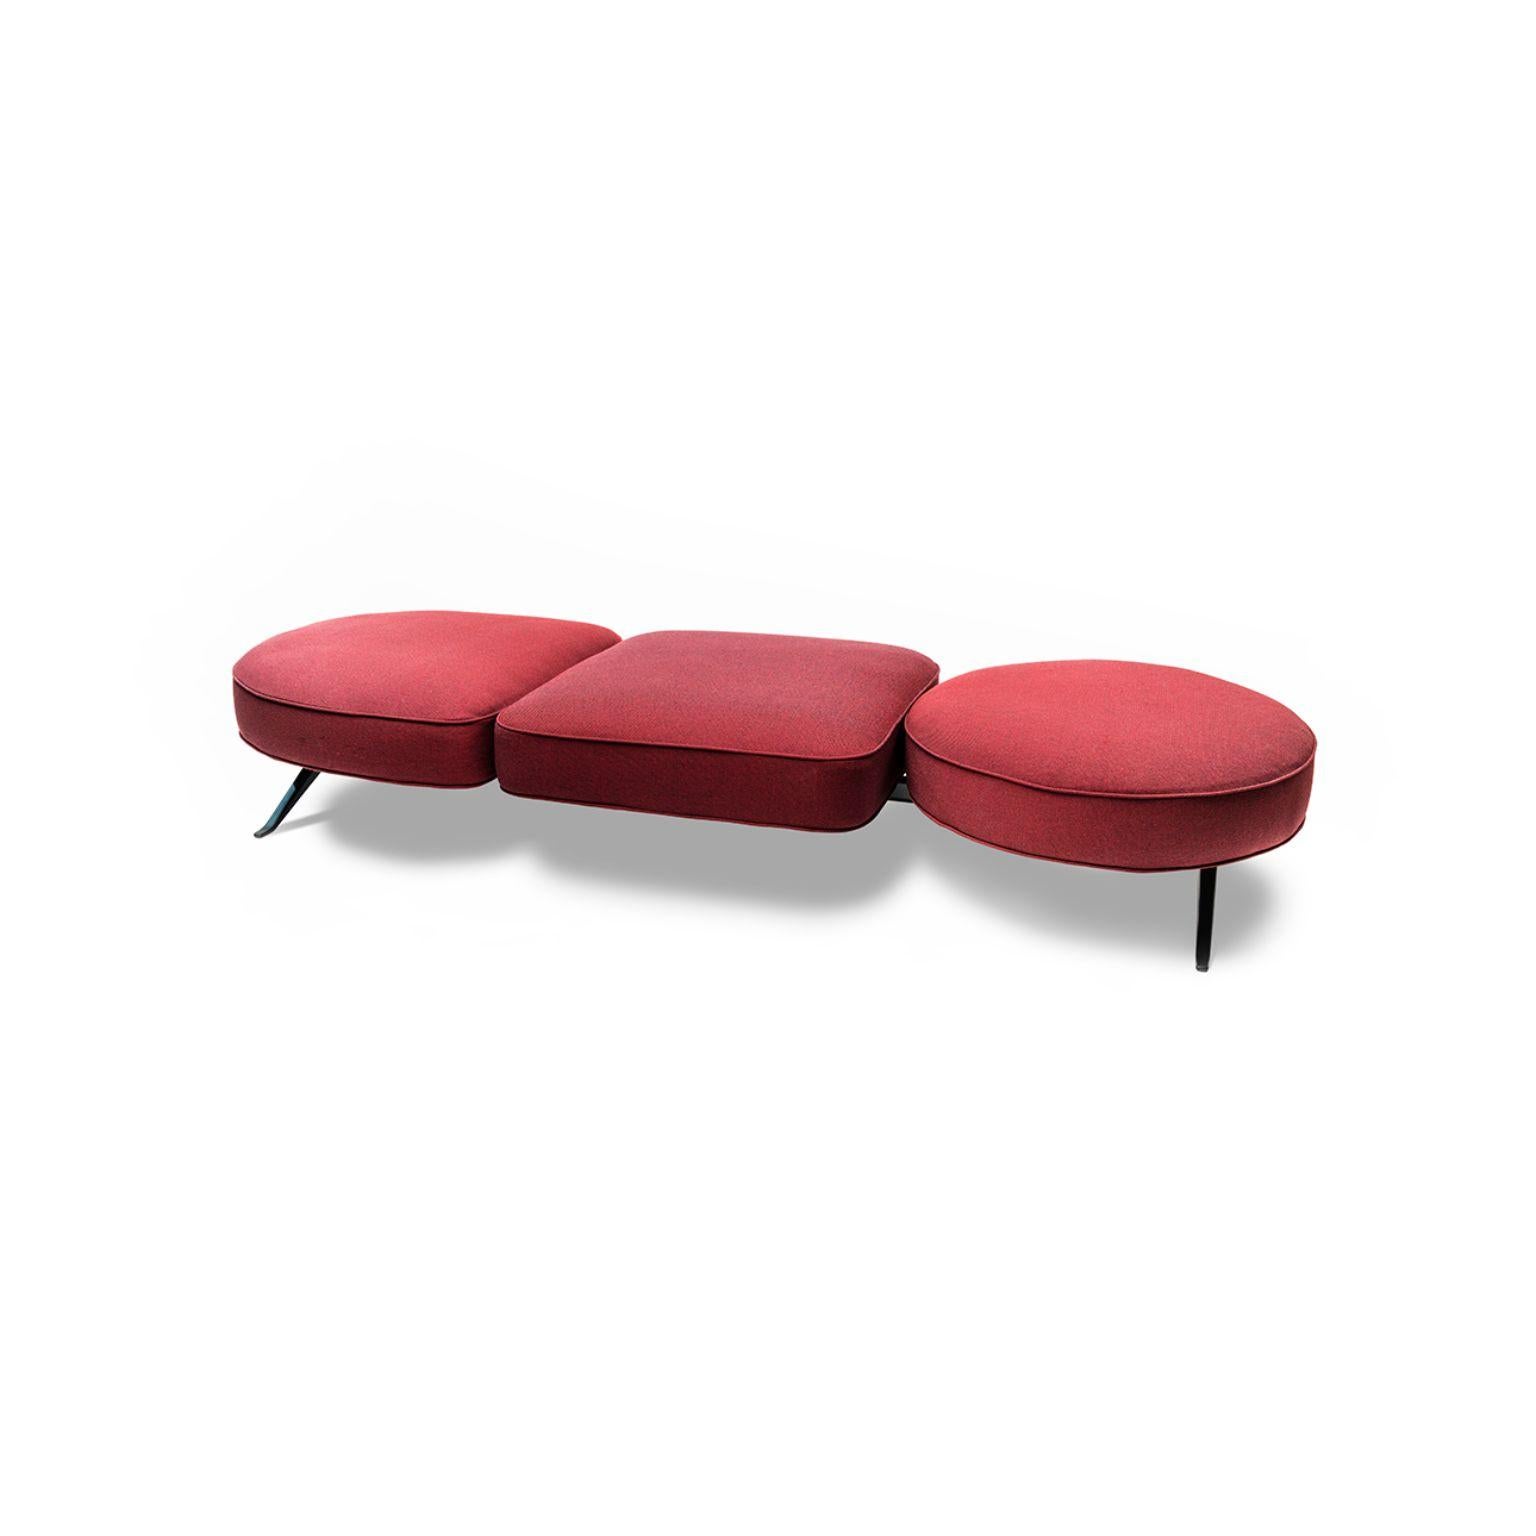 Luizet 3 seats without back modular sofa by Luca Nichetto
Materials: Upholstery: Fabric 
 Top: Verde Marinace granite/Emperador Silver dark/Emperador Tundra/Red marble/Terrazzo 
 Botticino marble or Noce Canaletto wood
Structure: Powder-coated